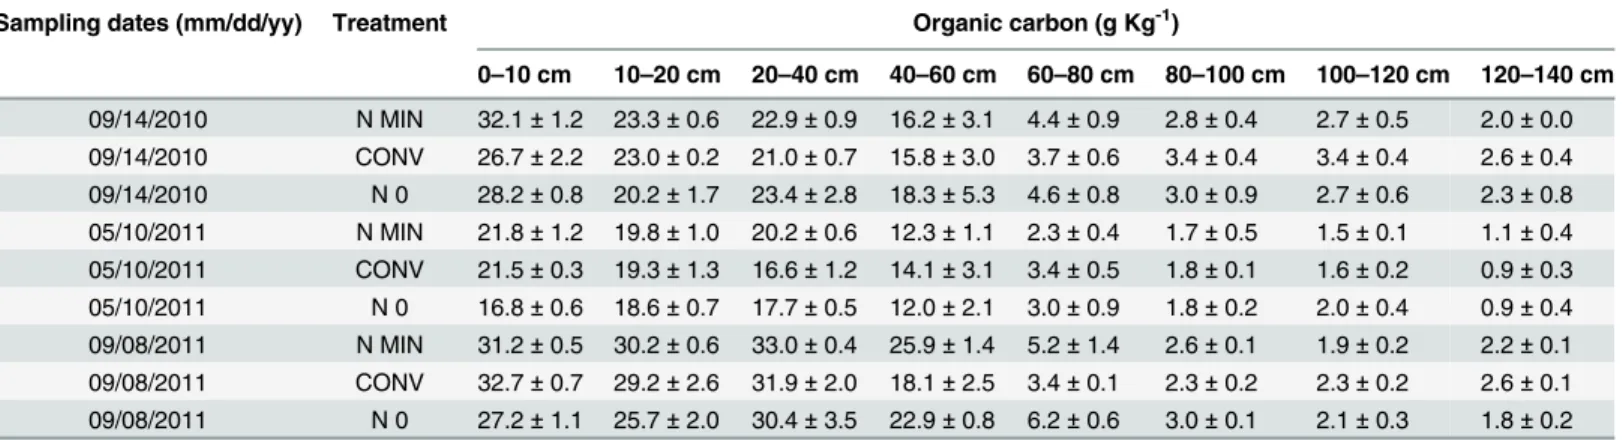 Table 4. Means and standard errors of organic carbon content in soil profile layers related to three sampling dates during the maize-triticale-maize rotation for the N MIN, CONV and N0 treatments (n = 3)